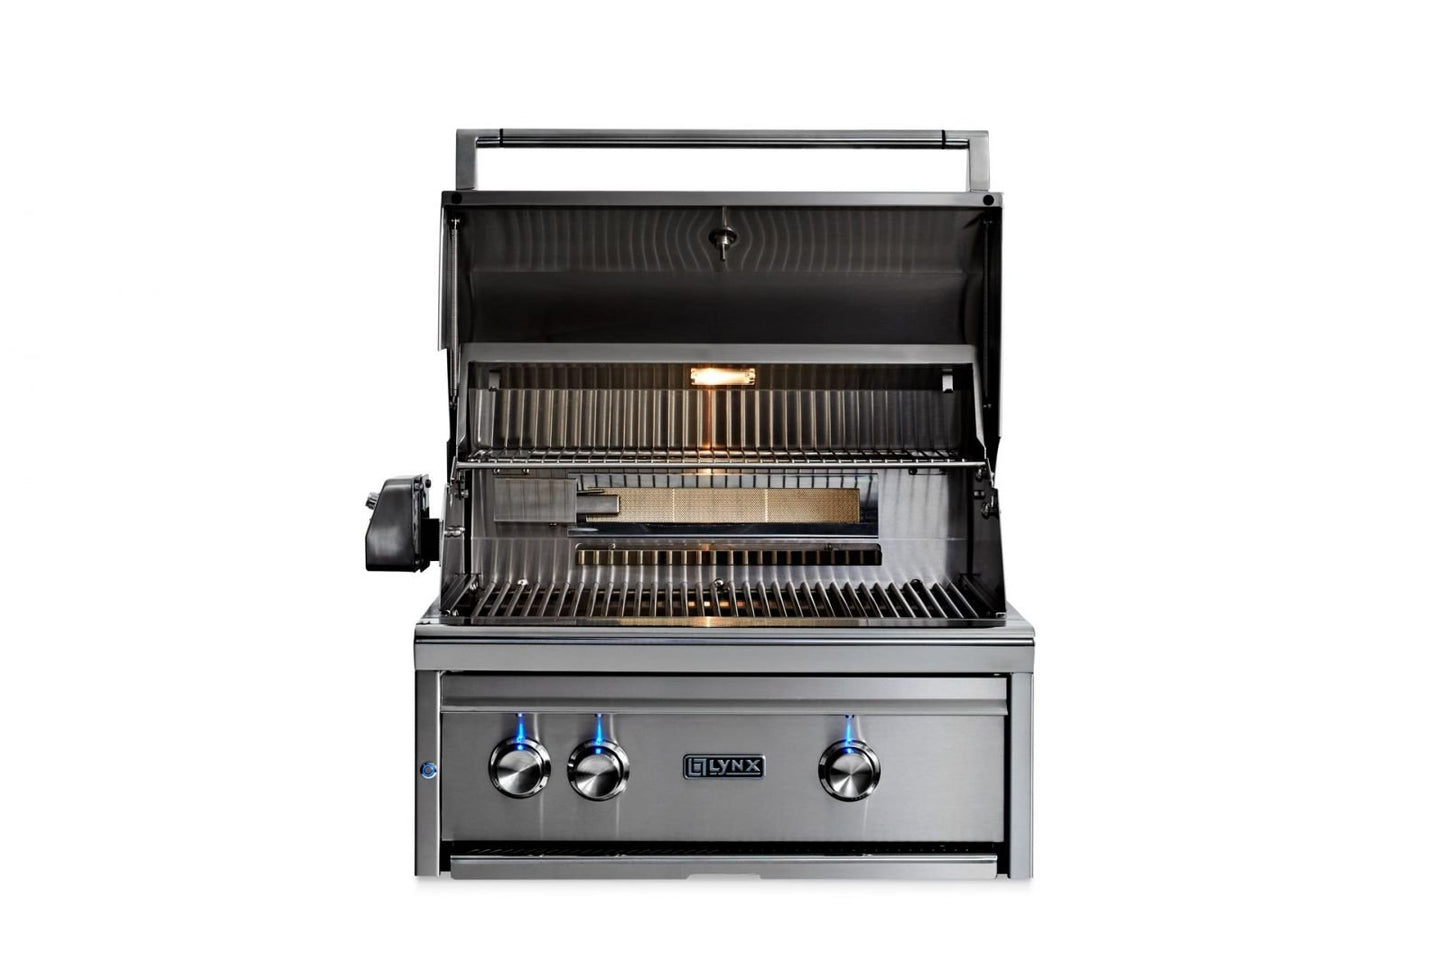 Lynx - 27" Professional Built-In Grill